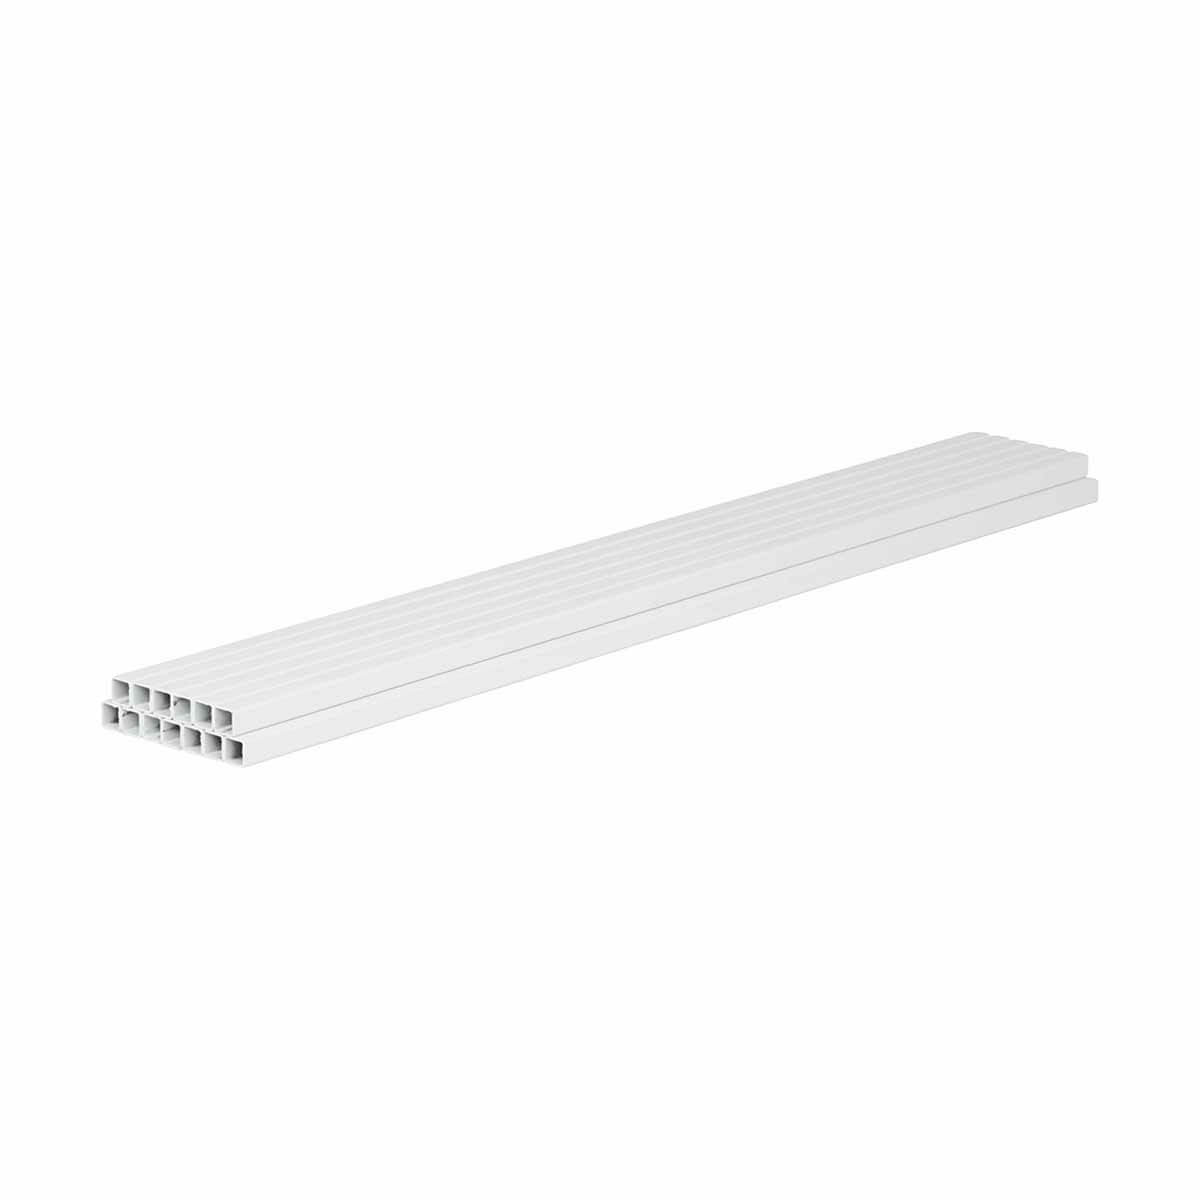 Stair Picket Set White - 5/8-in x 6-ft